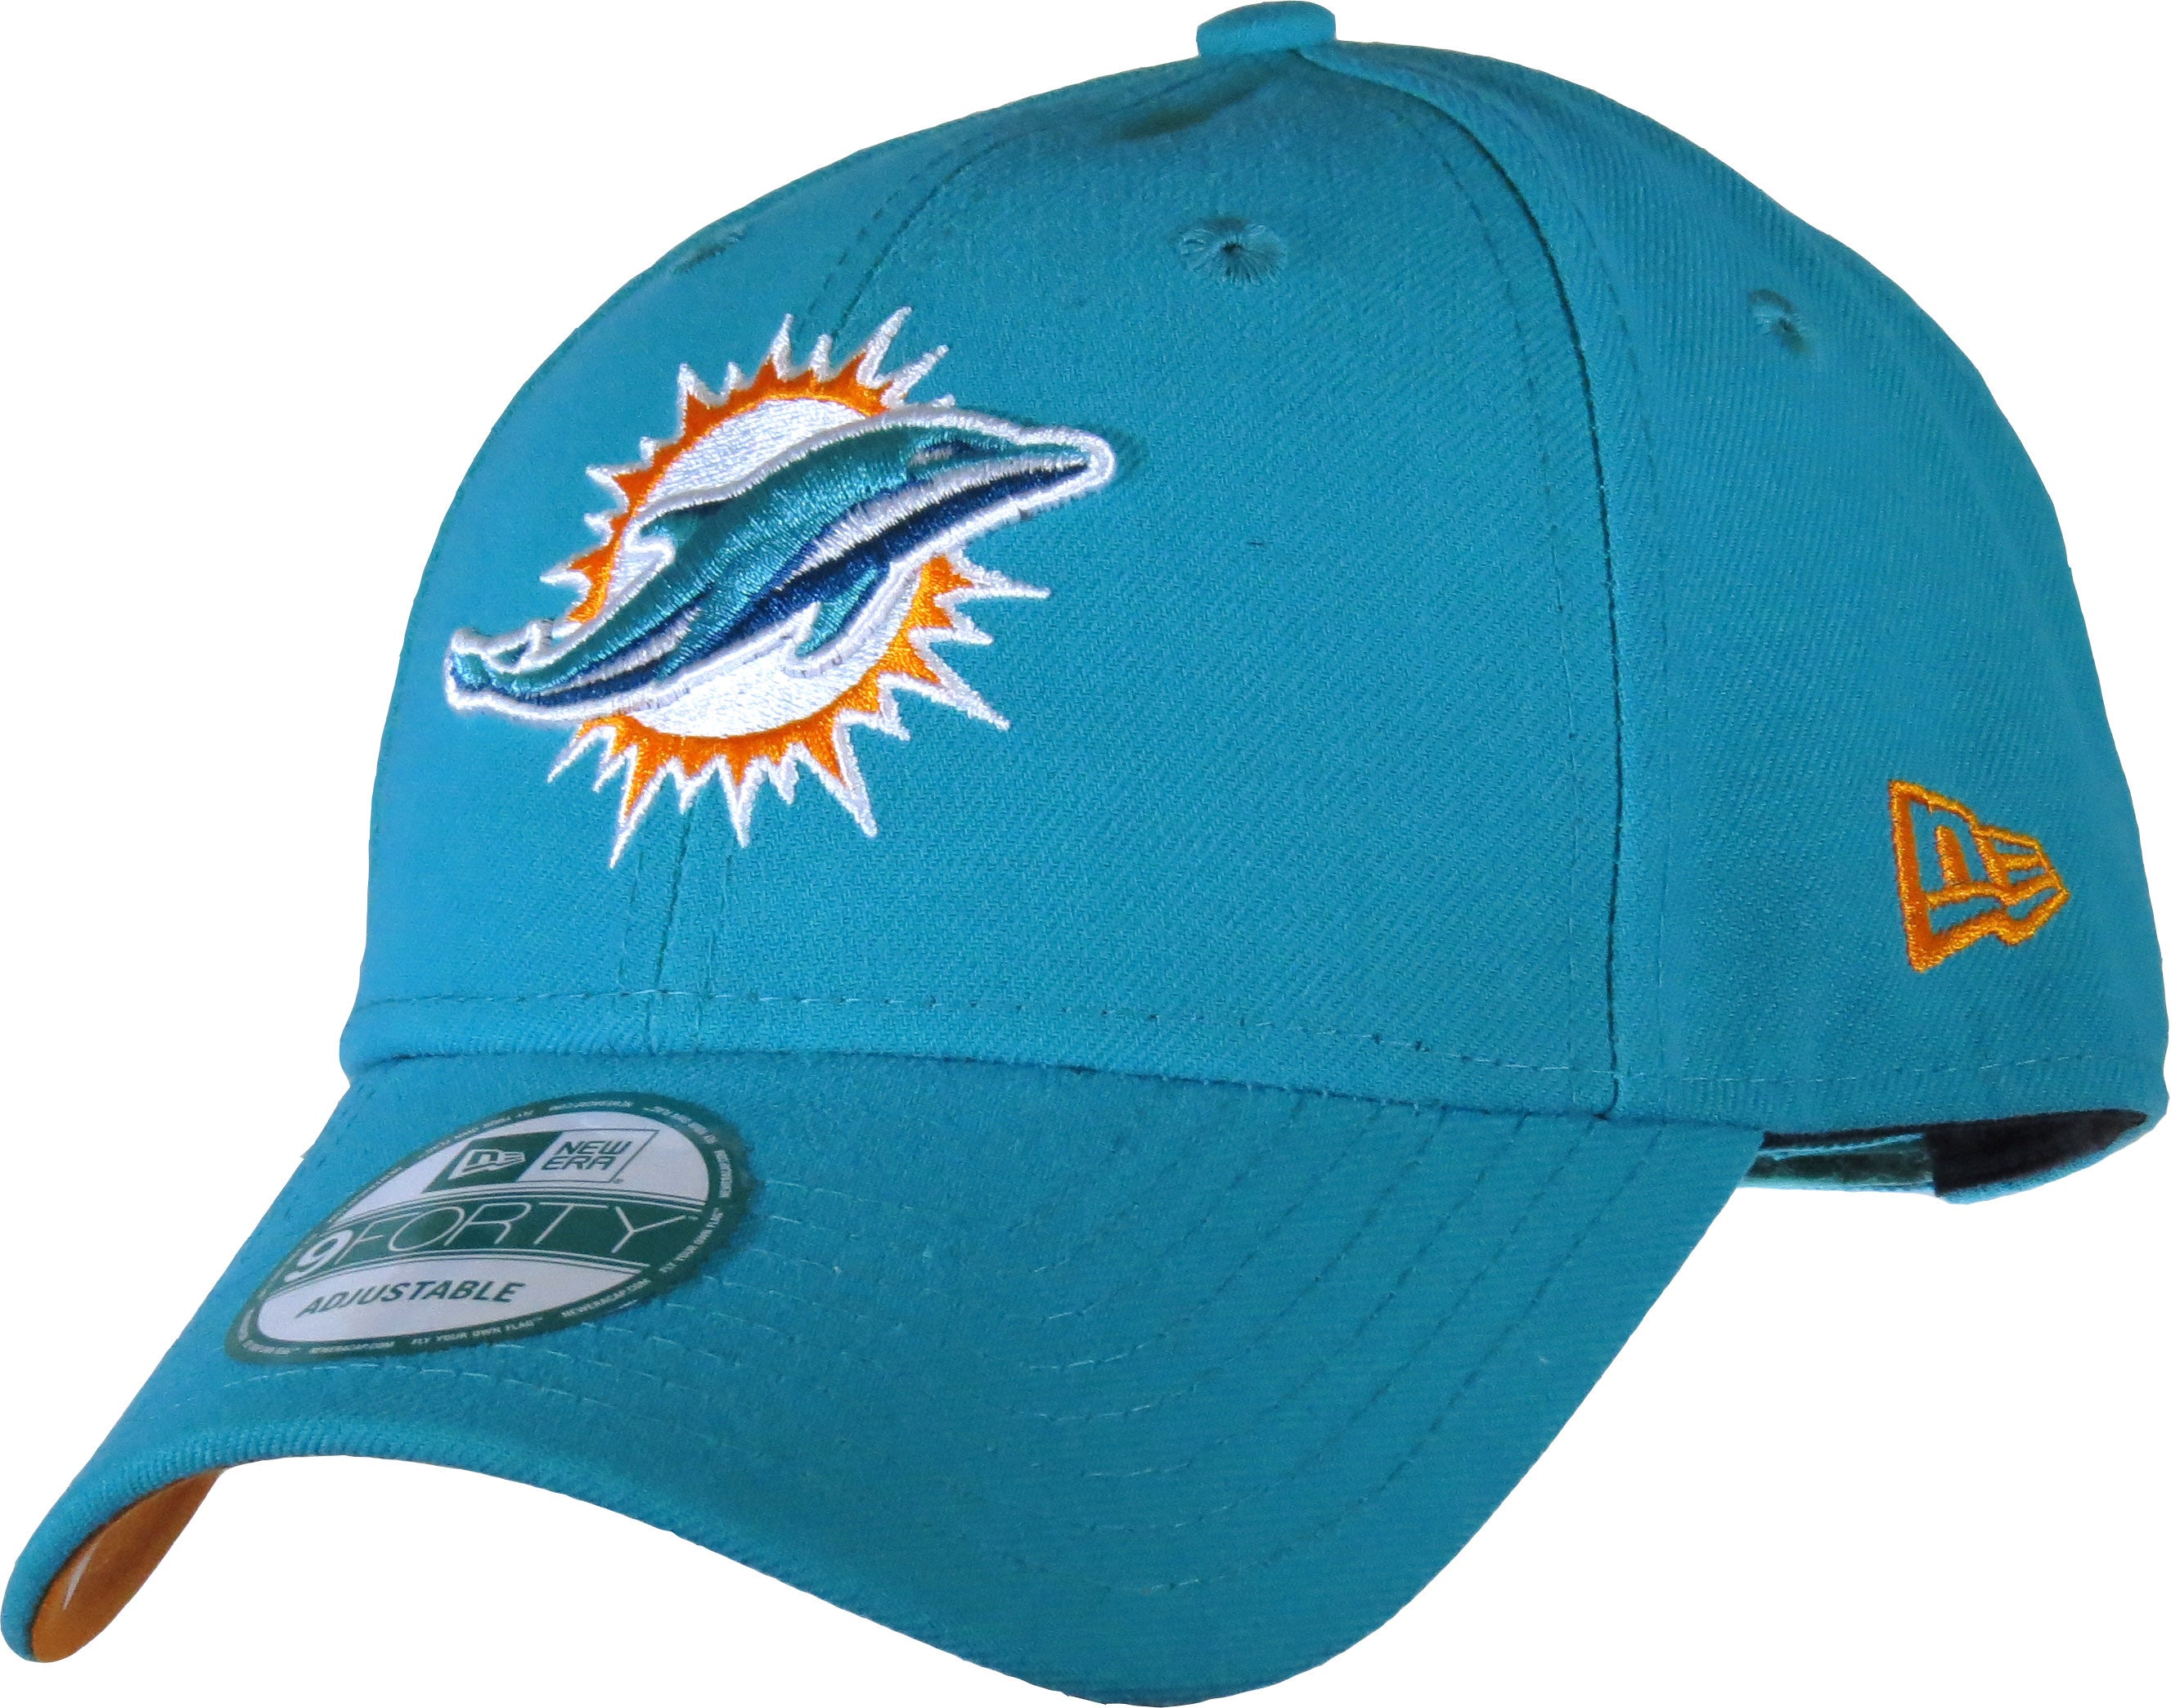 nfl youth caps